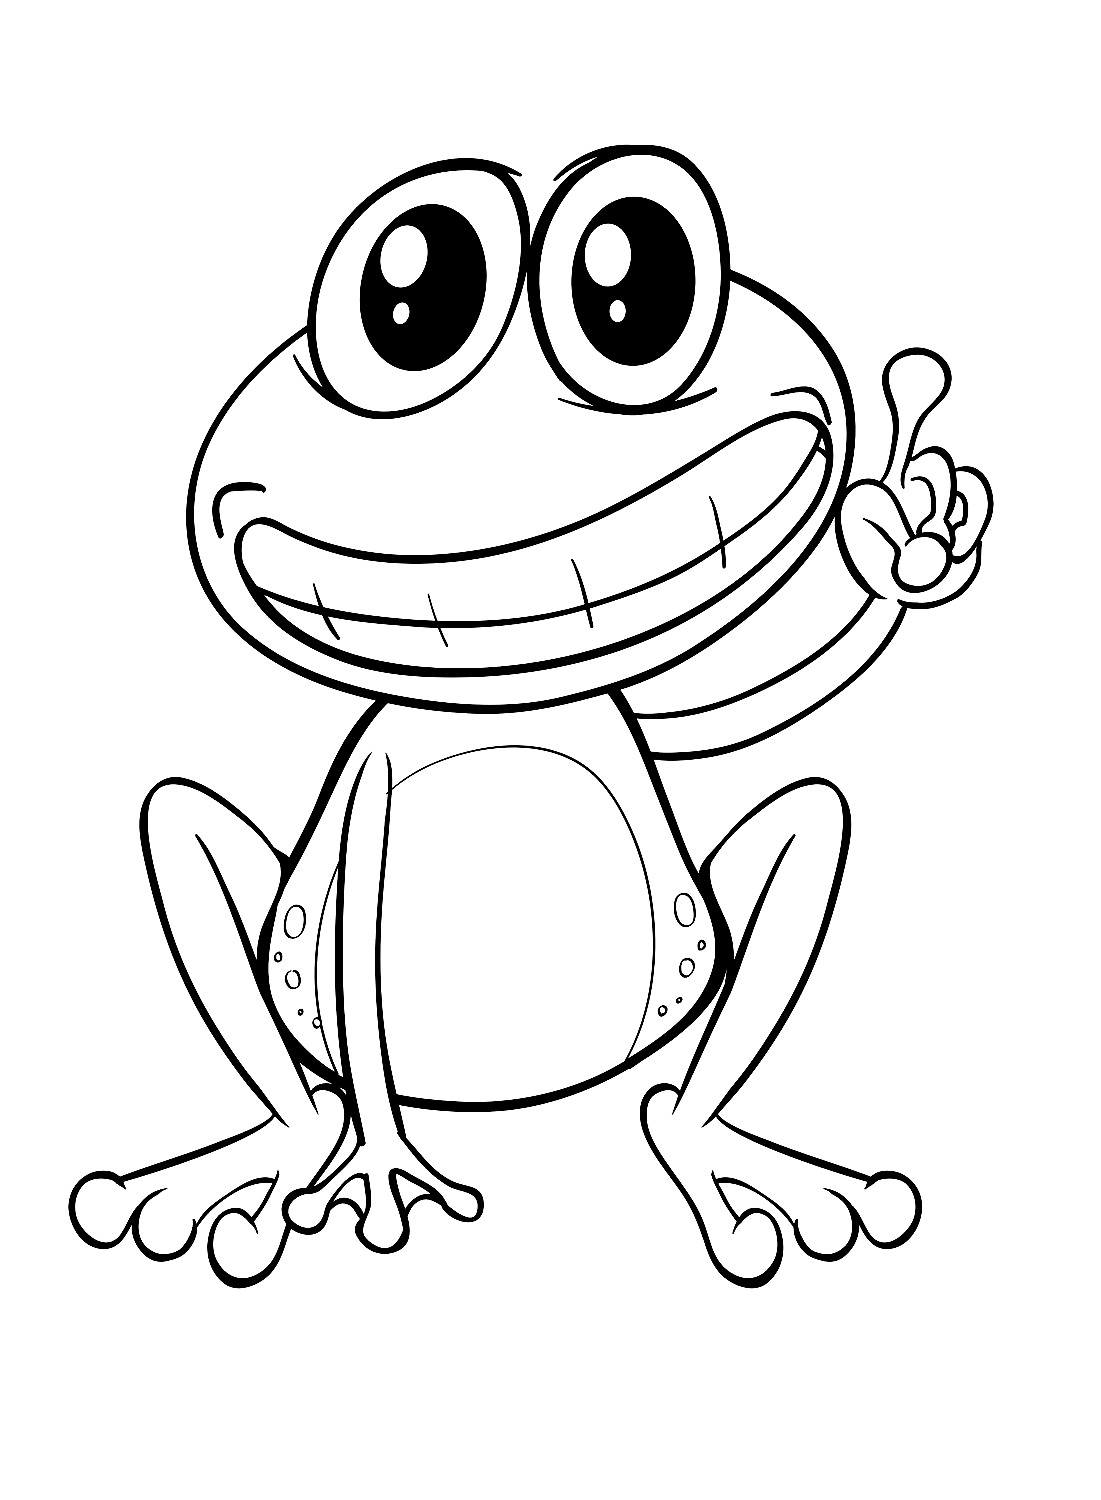 Happy Frog pictures to color